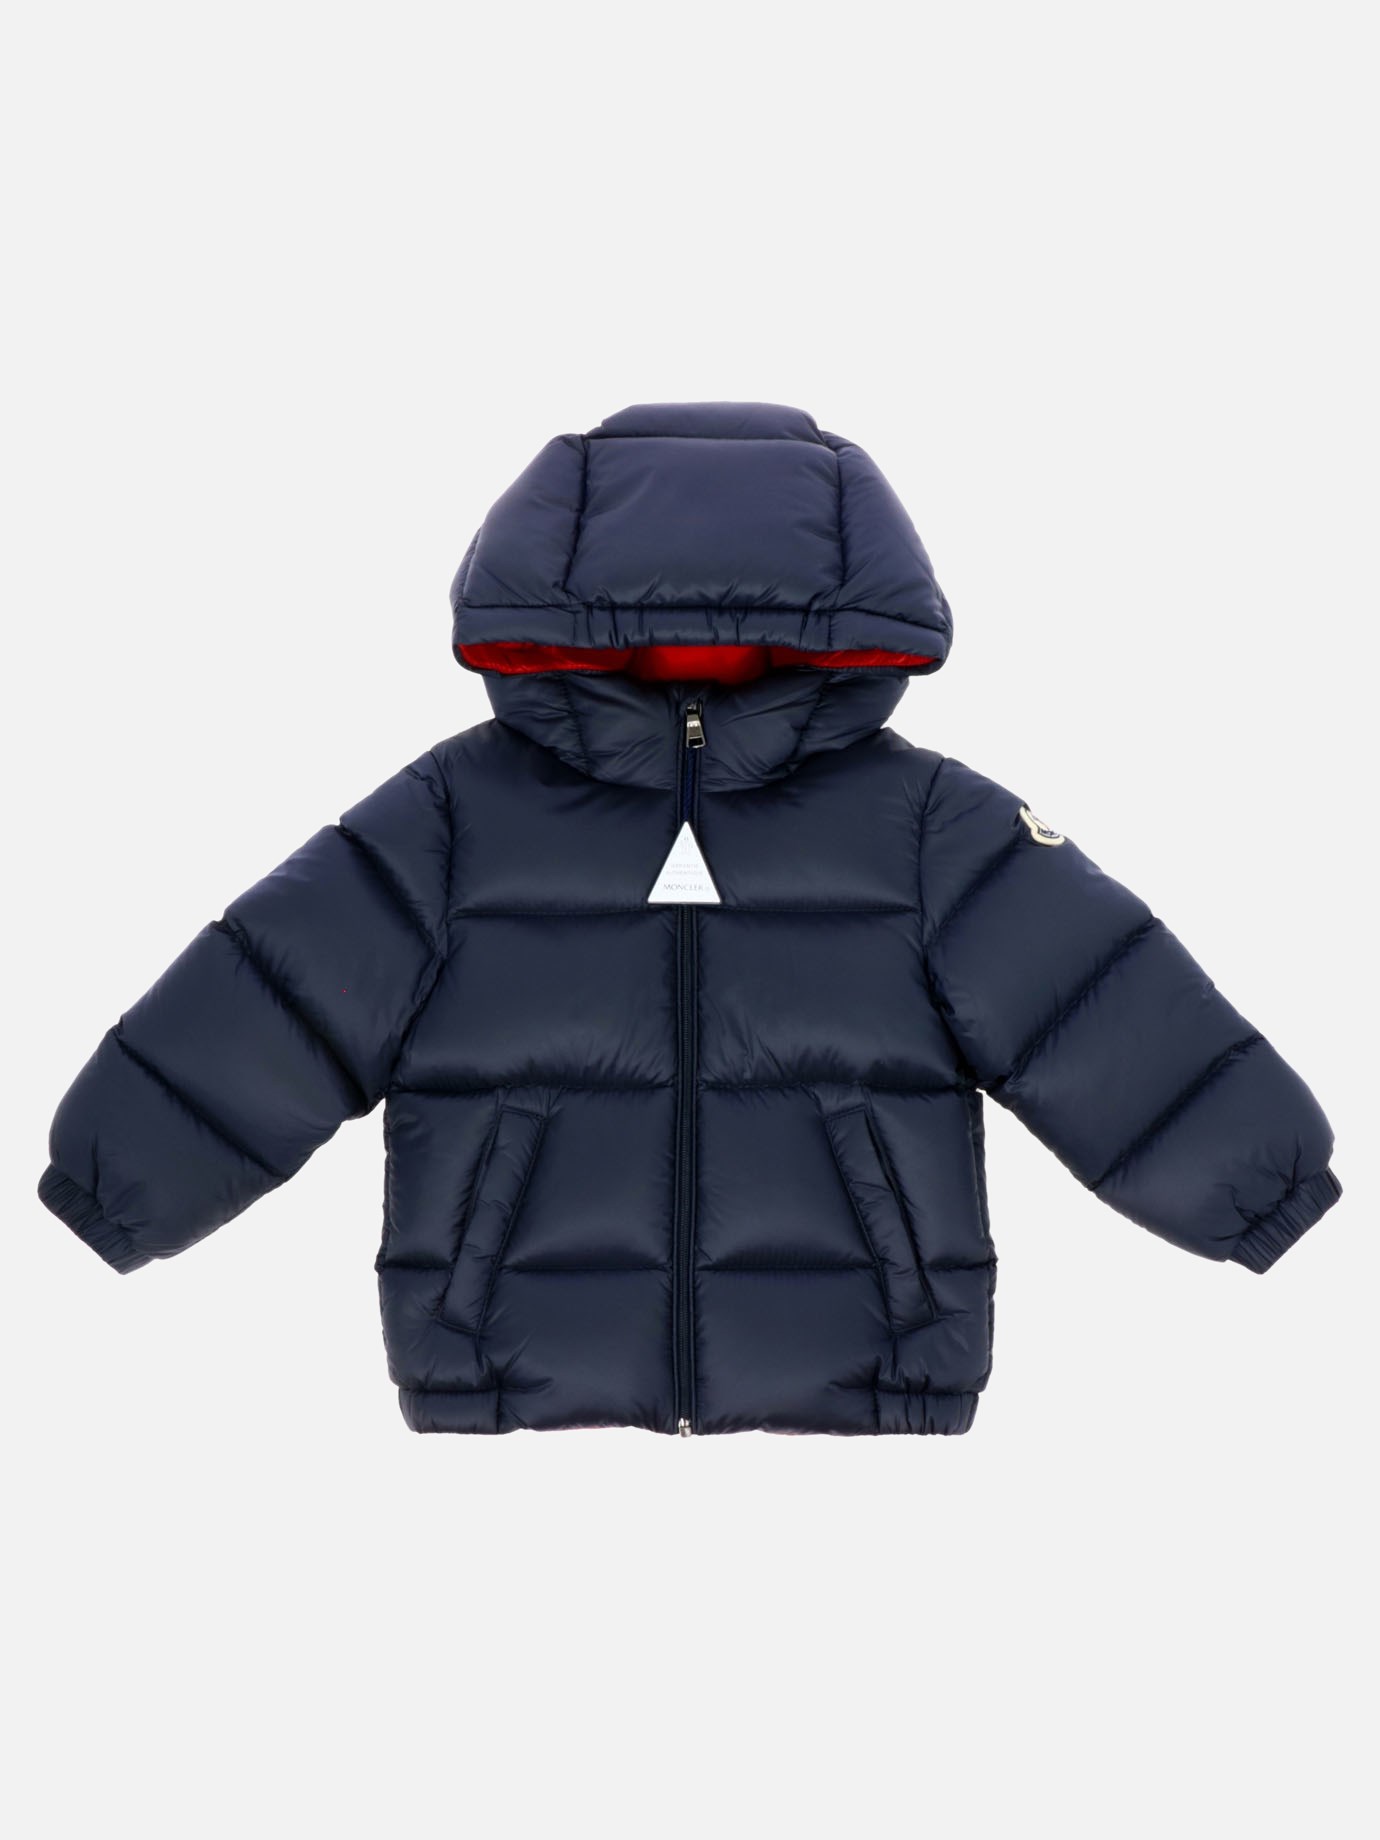  New Macaire  down jacketby Moncler Enfant - 4